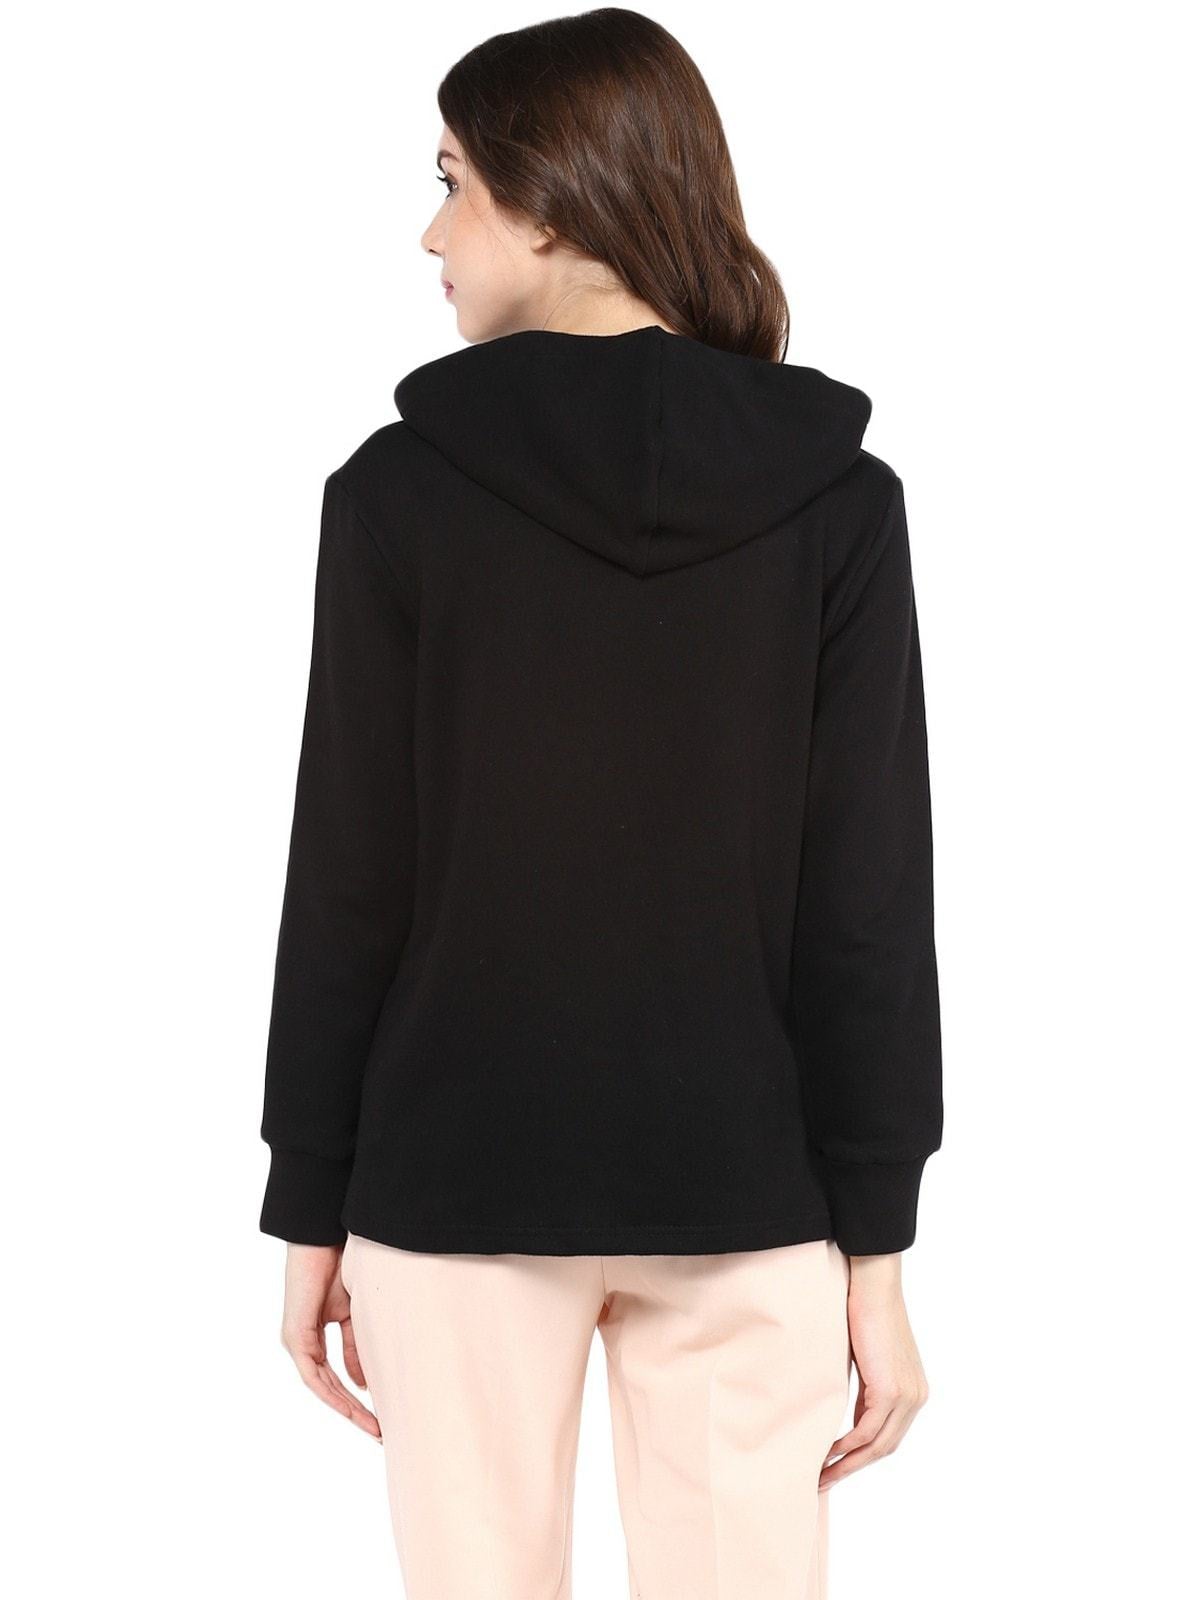 Women's Solid Hooded Sweatshirts With Zipper - Pannkh